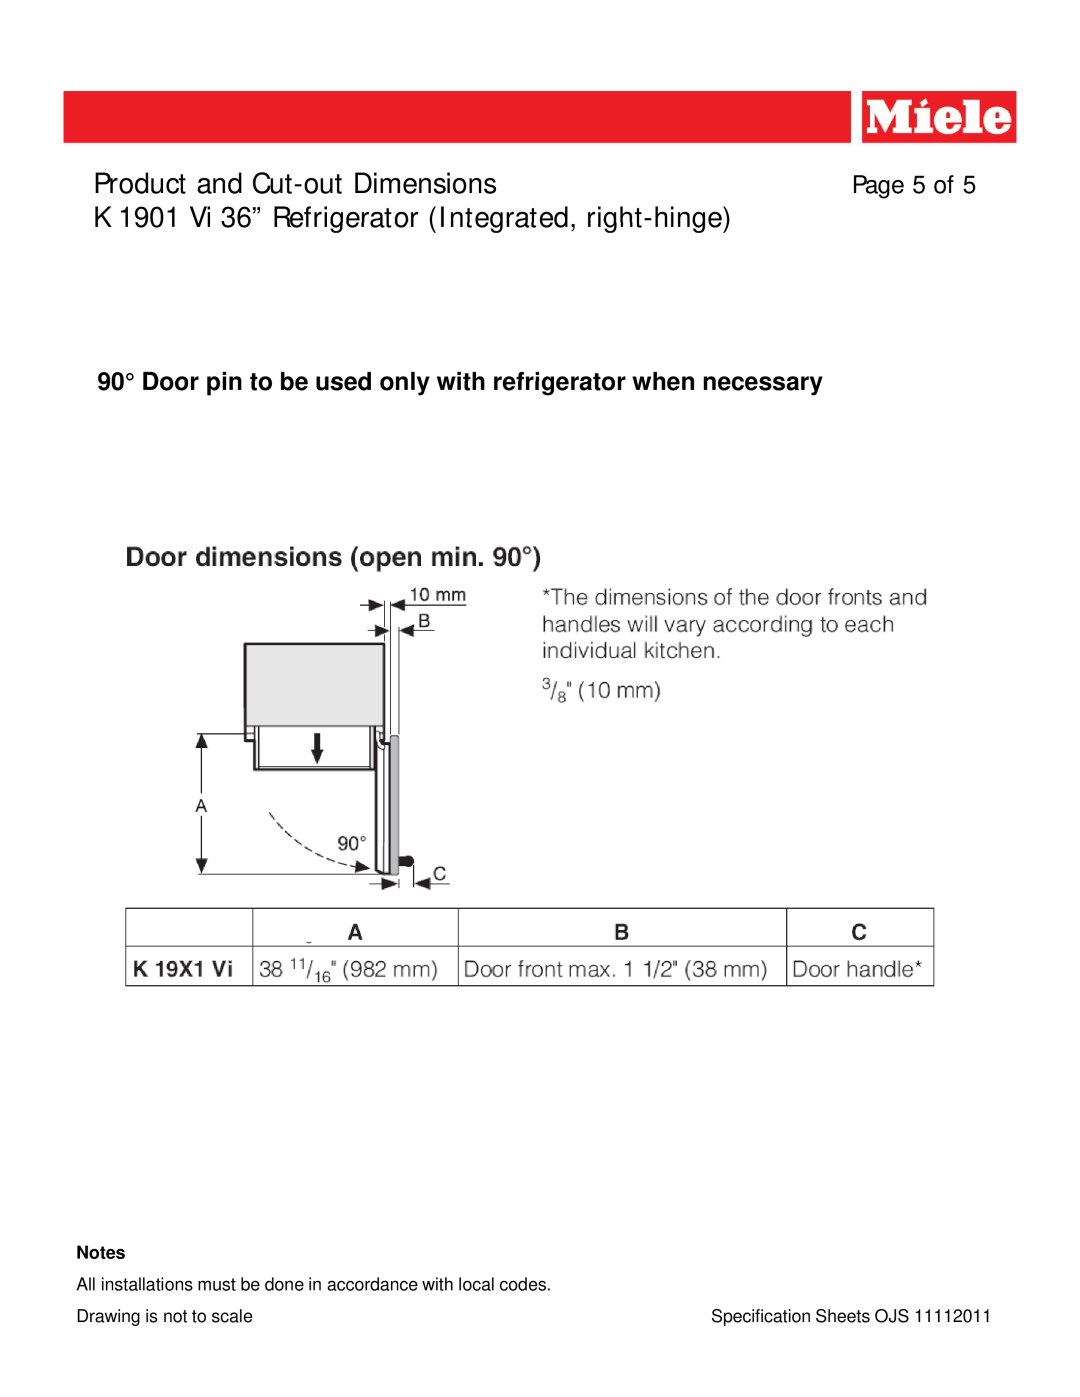 Miele K 1901 VI 36 dimensions Page 5 of, Product and Cut-outDimensions, Drawing is not to scale, Specification Sheets OJS 